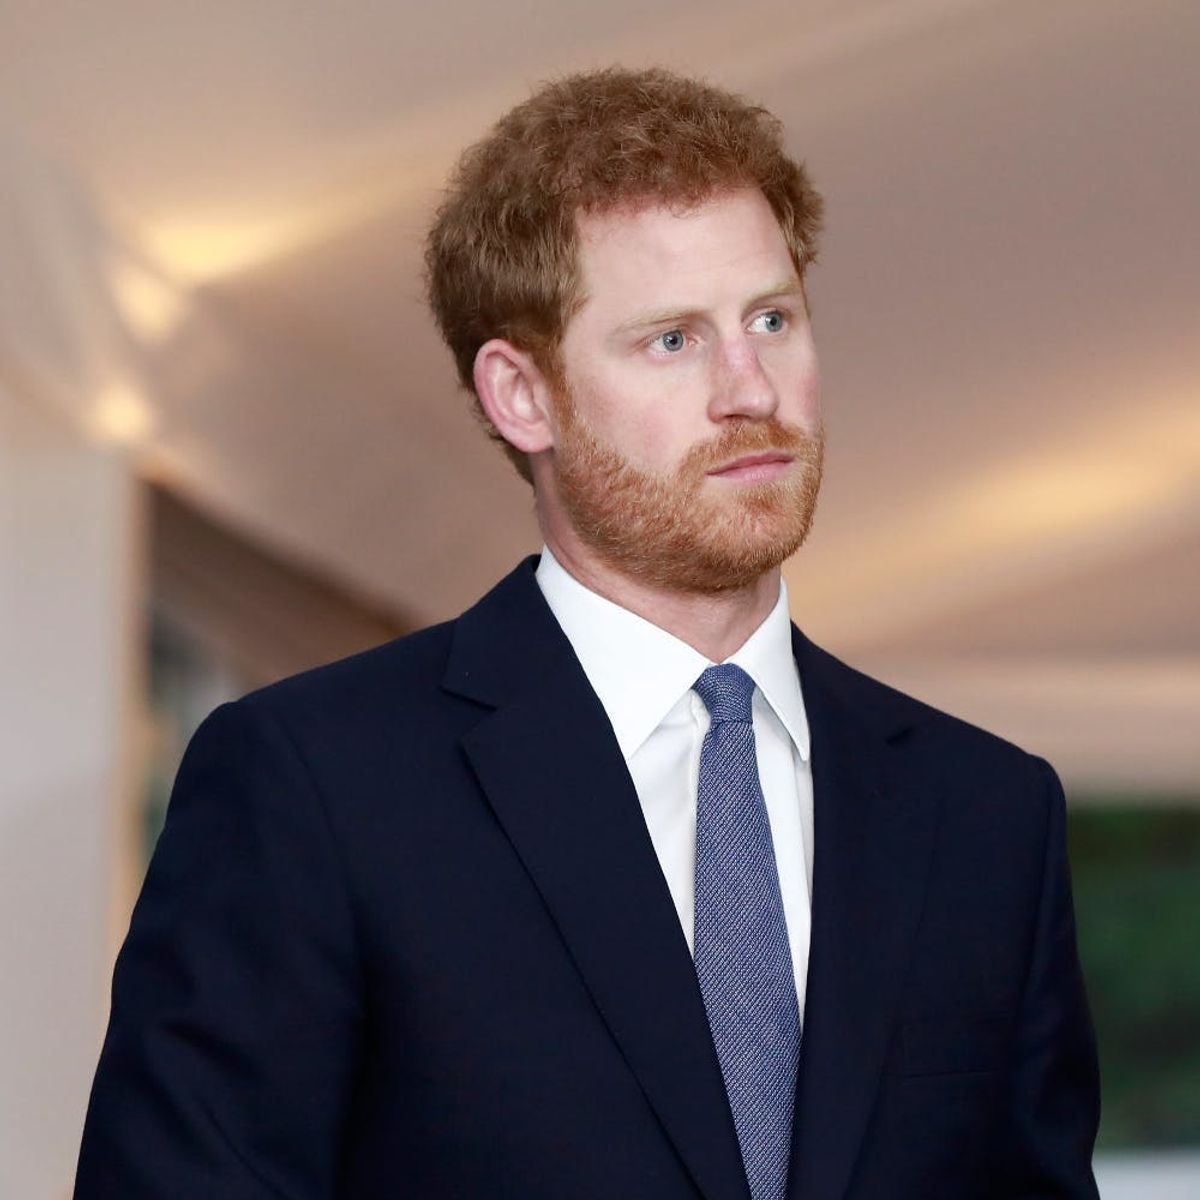 Prince Harry Just Made This Heartbreaking Revelation About His Mental State After Mother’s Death